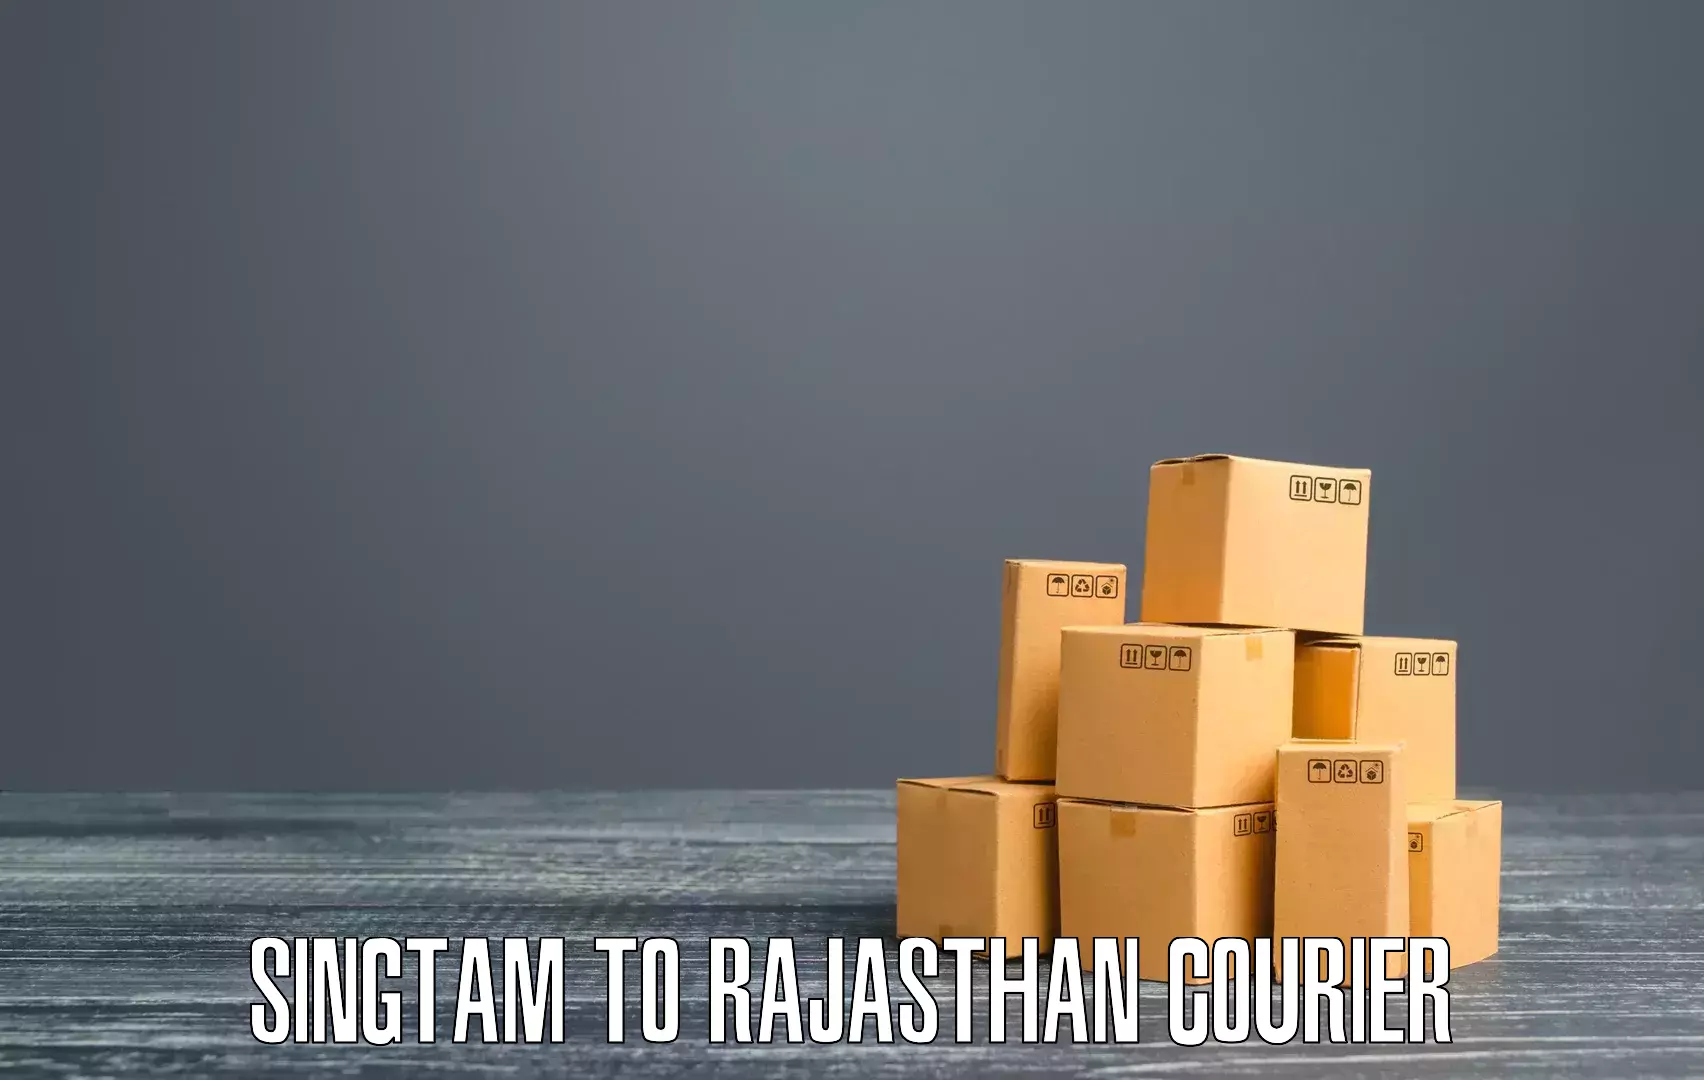 Global courier networks Singtam to Rajasthan